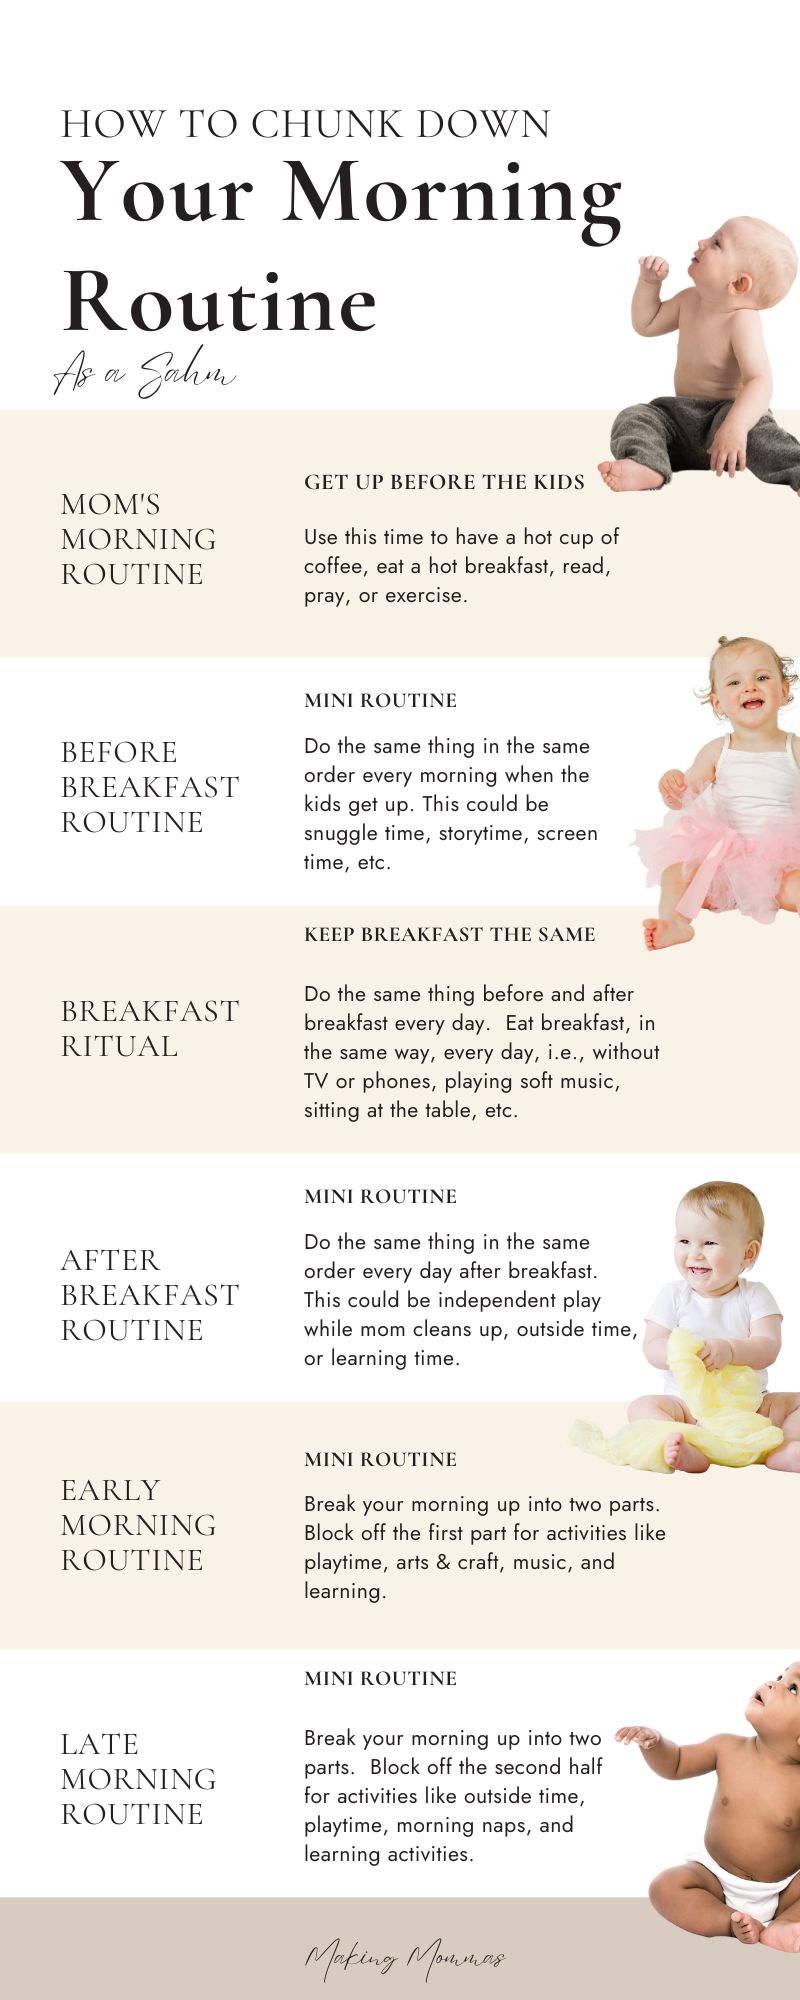 infographic reading "How to chunk down your morning routine as a sahm" outlining each step, with babies on the side